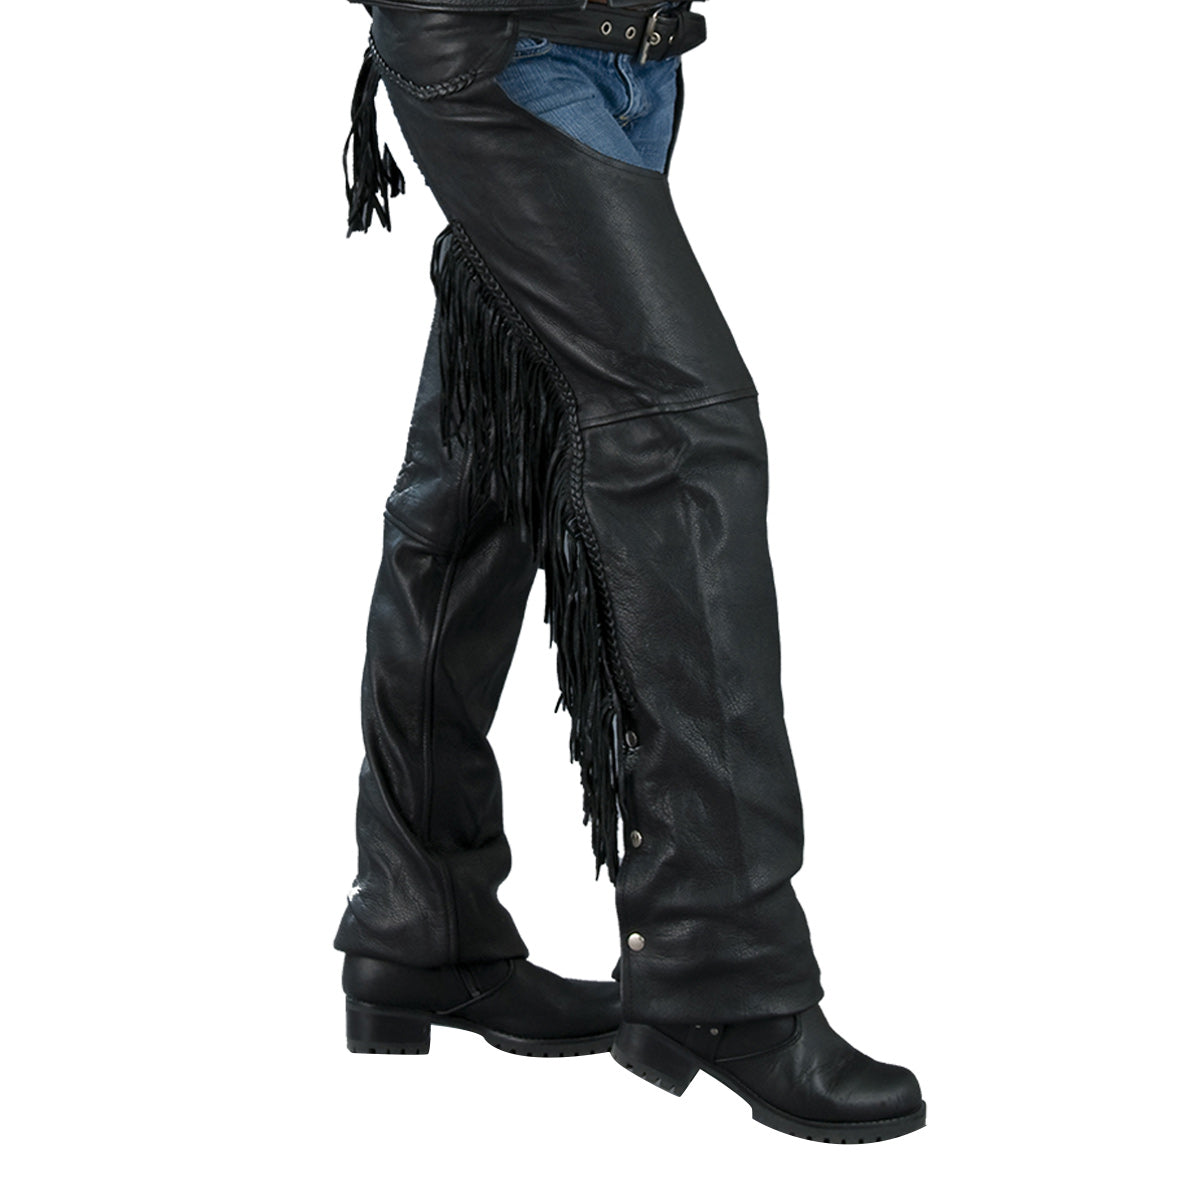 Milwaukee Leather SH1116 Women's Black Leather 'Braided' Fringed Motorcycle Chaps